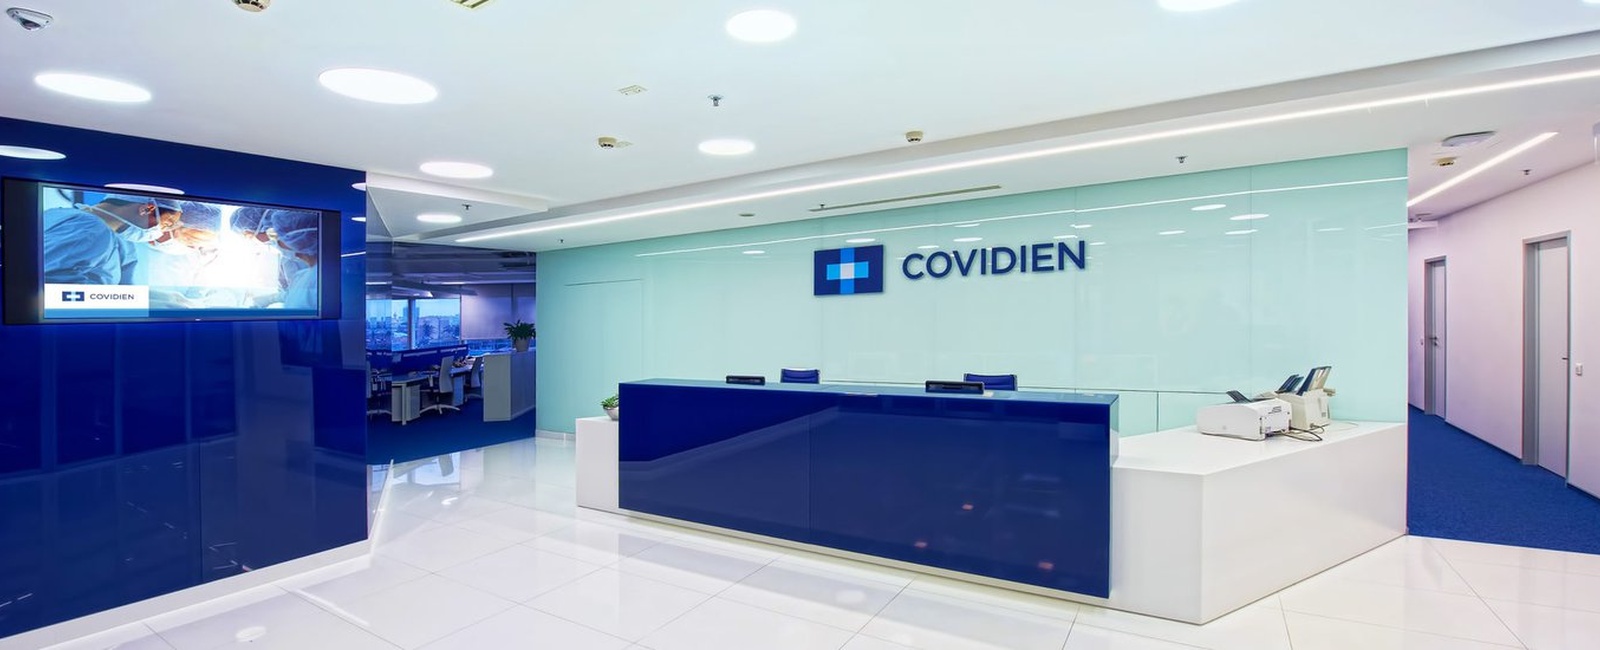 Create Multimedia System Complex for a New Covidien Office